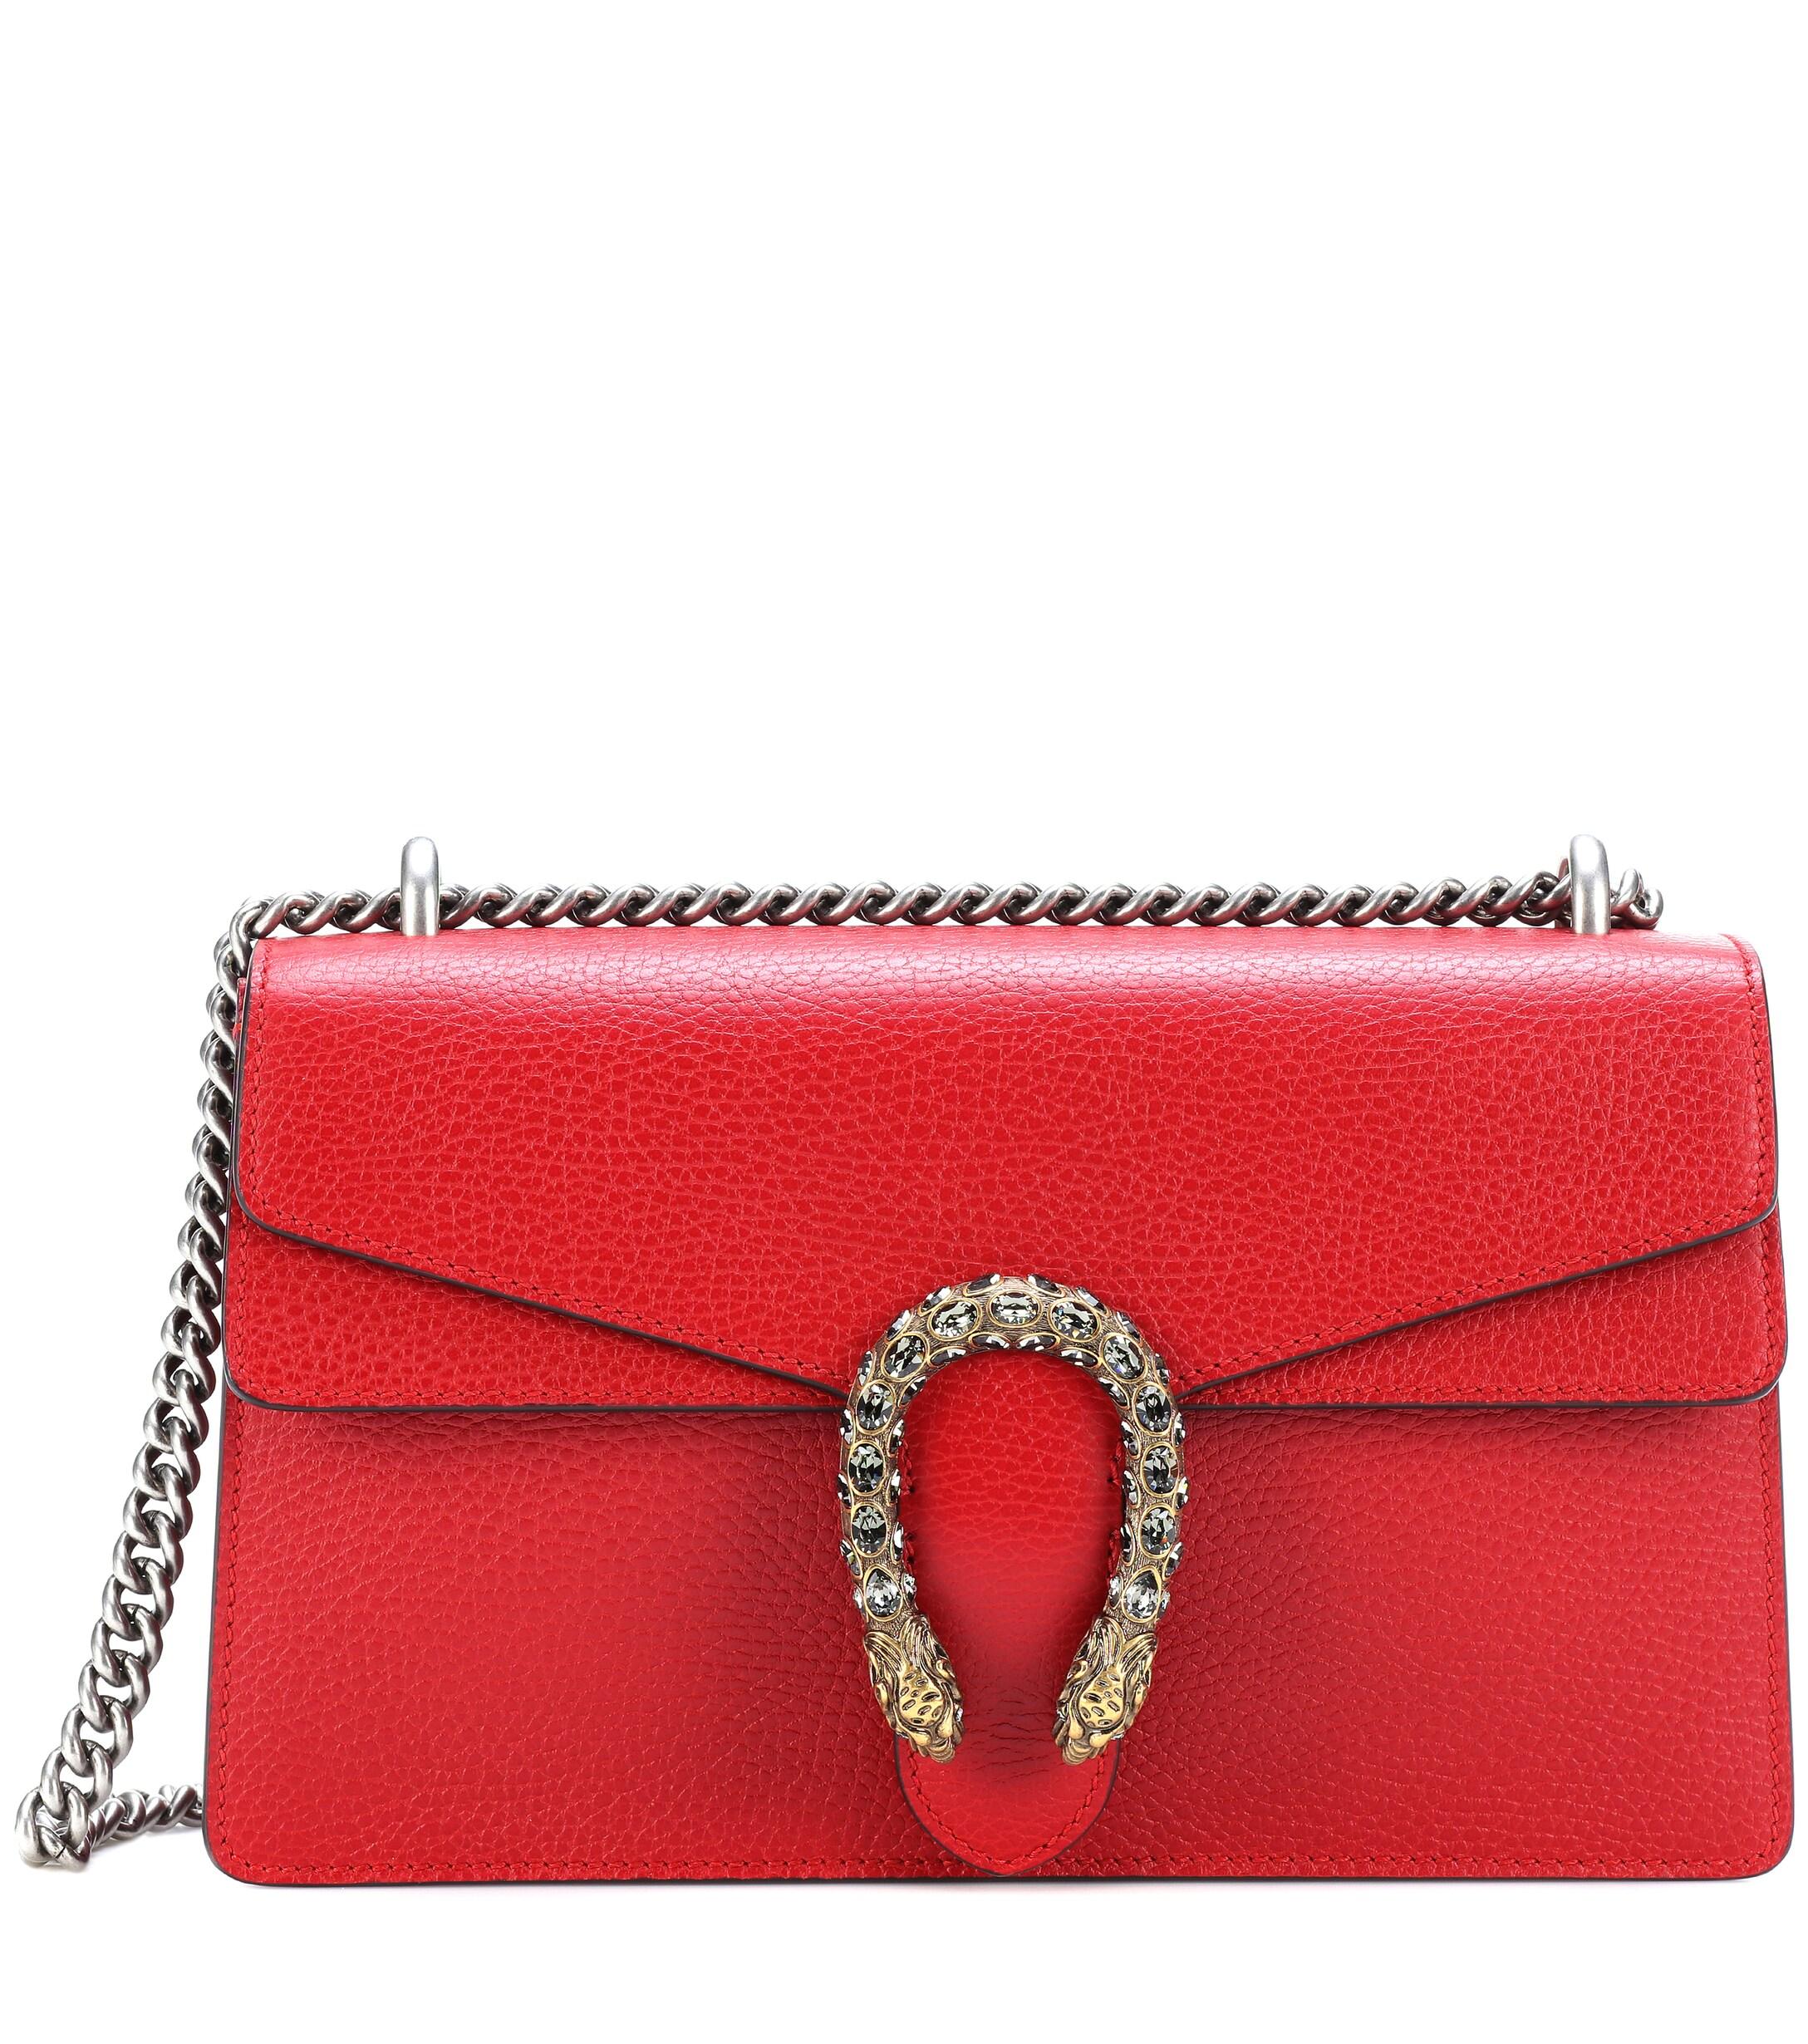 gucci dionysus red leather